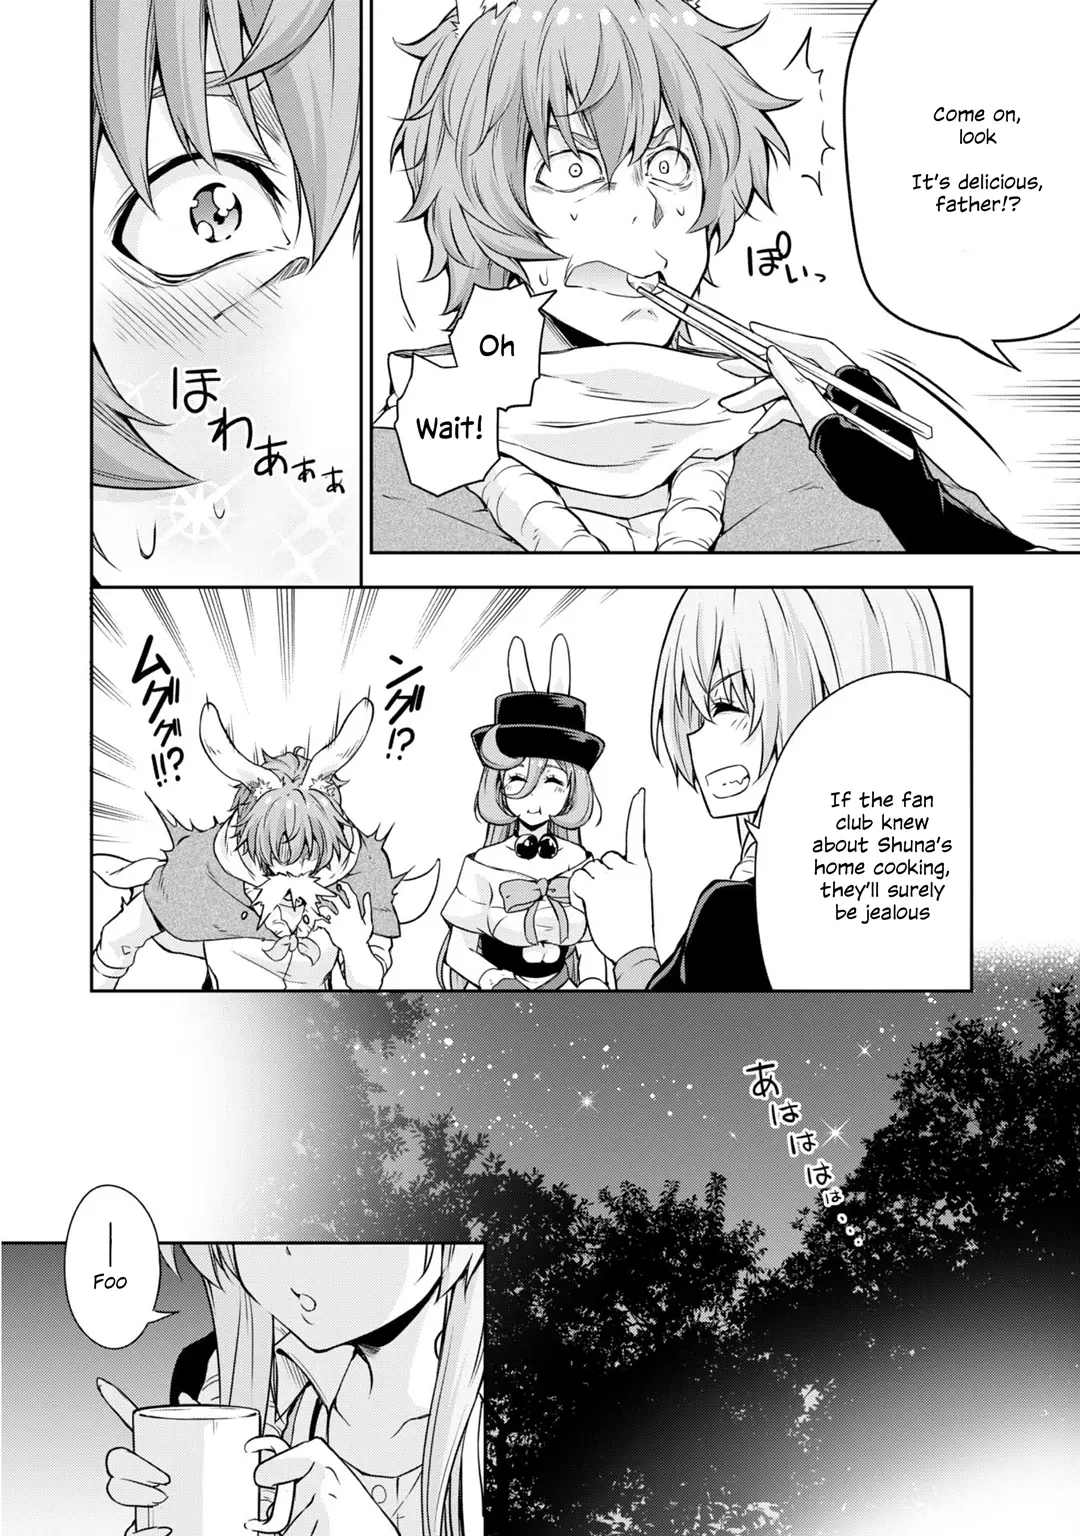 Tensei Shitara Slime Datta Ken: The Ways of Strolling in the Demon Country - 38 page 16